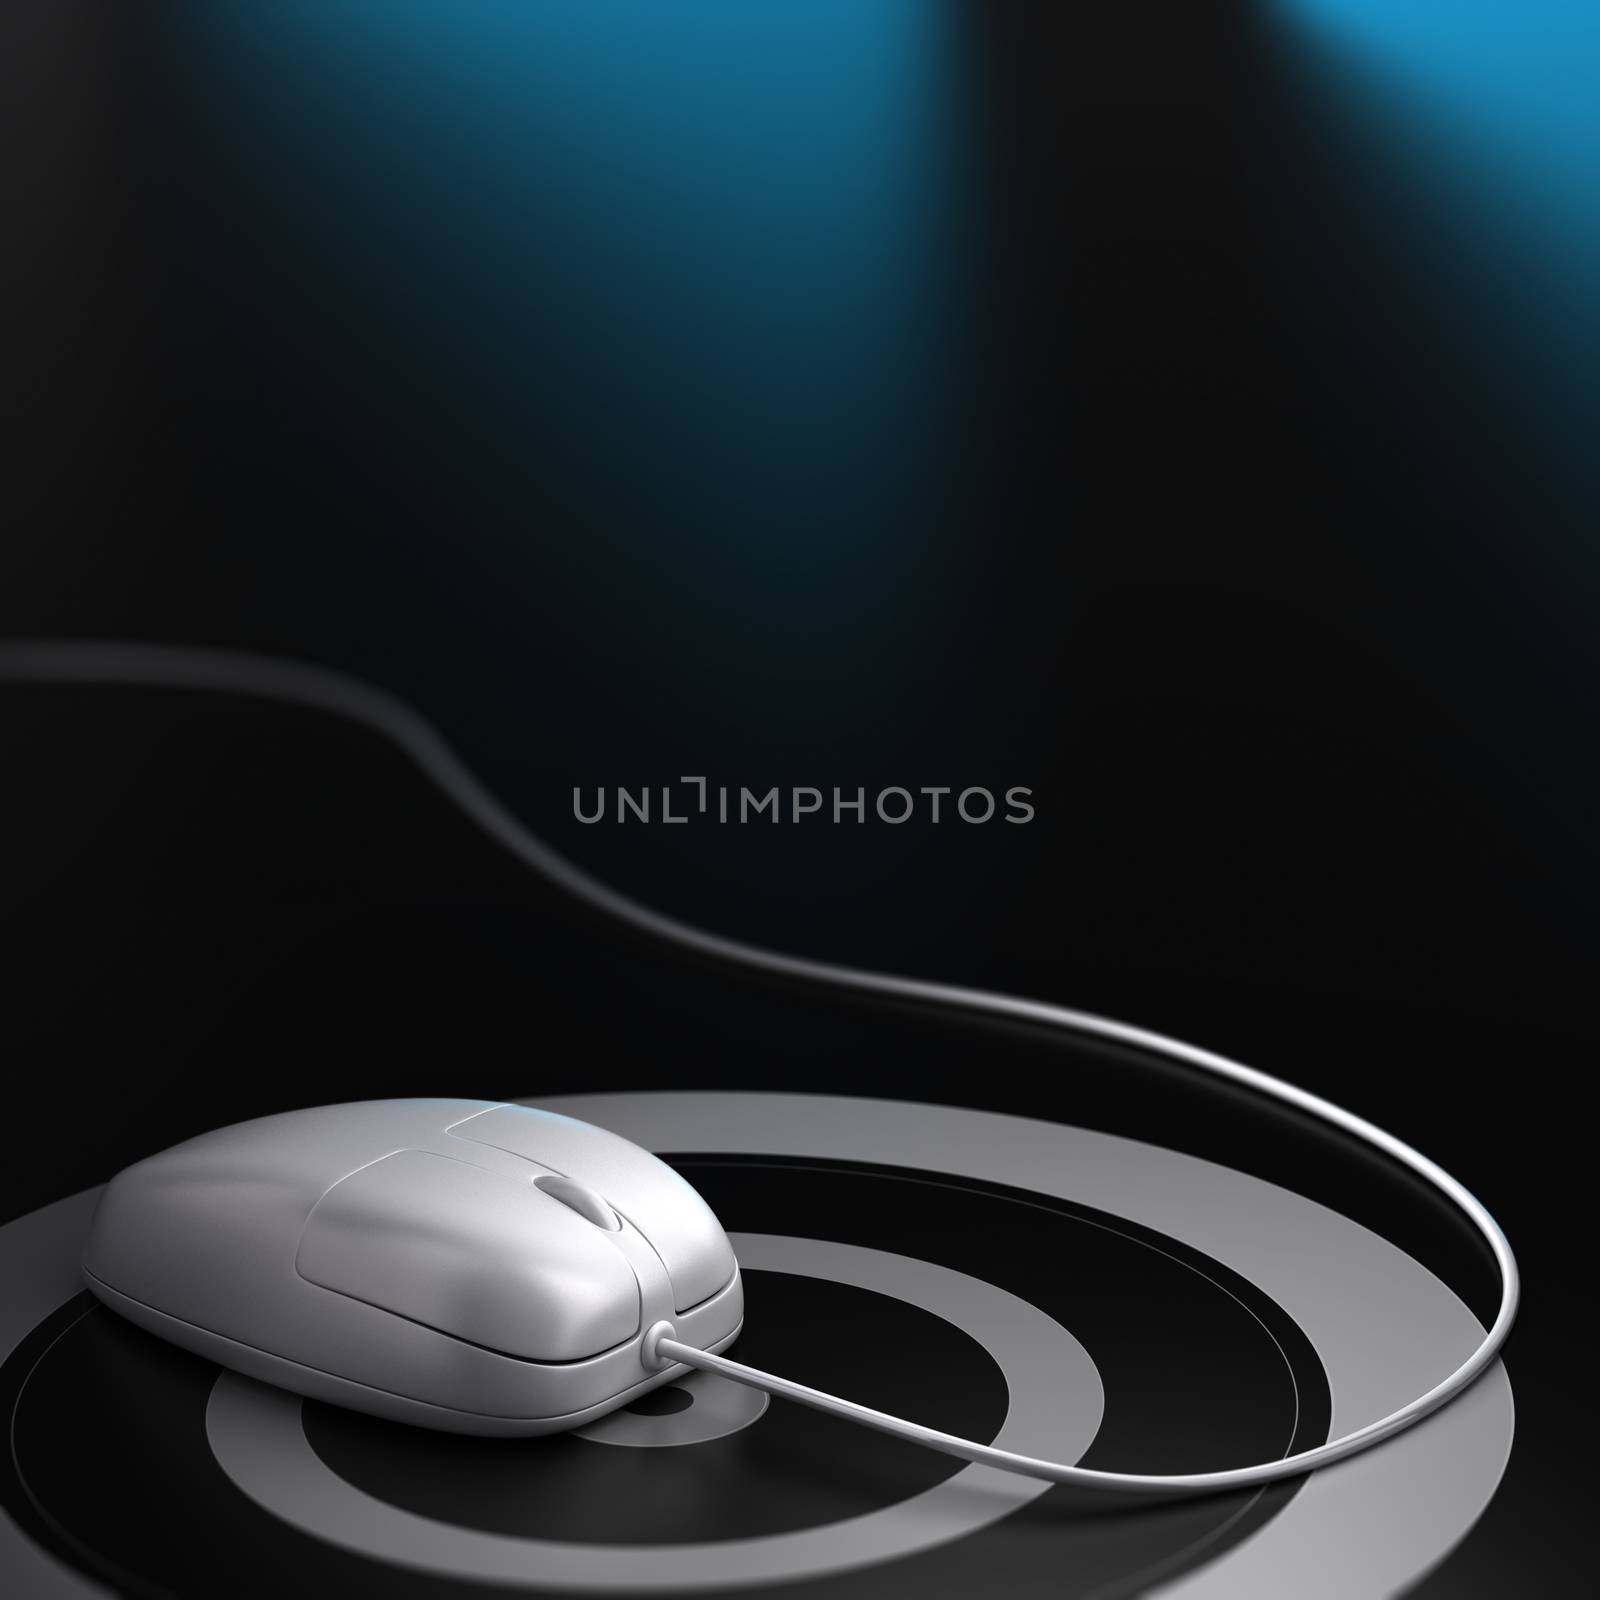 White mouse over a target with wire, black background, blue reflection and blur effect. Square image